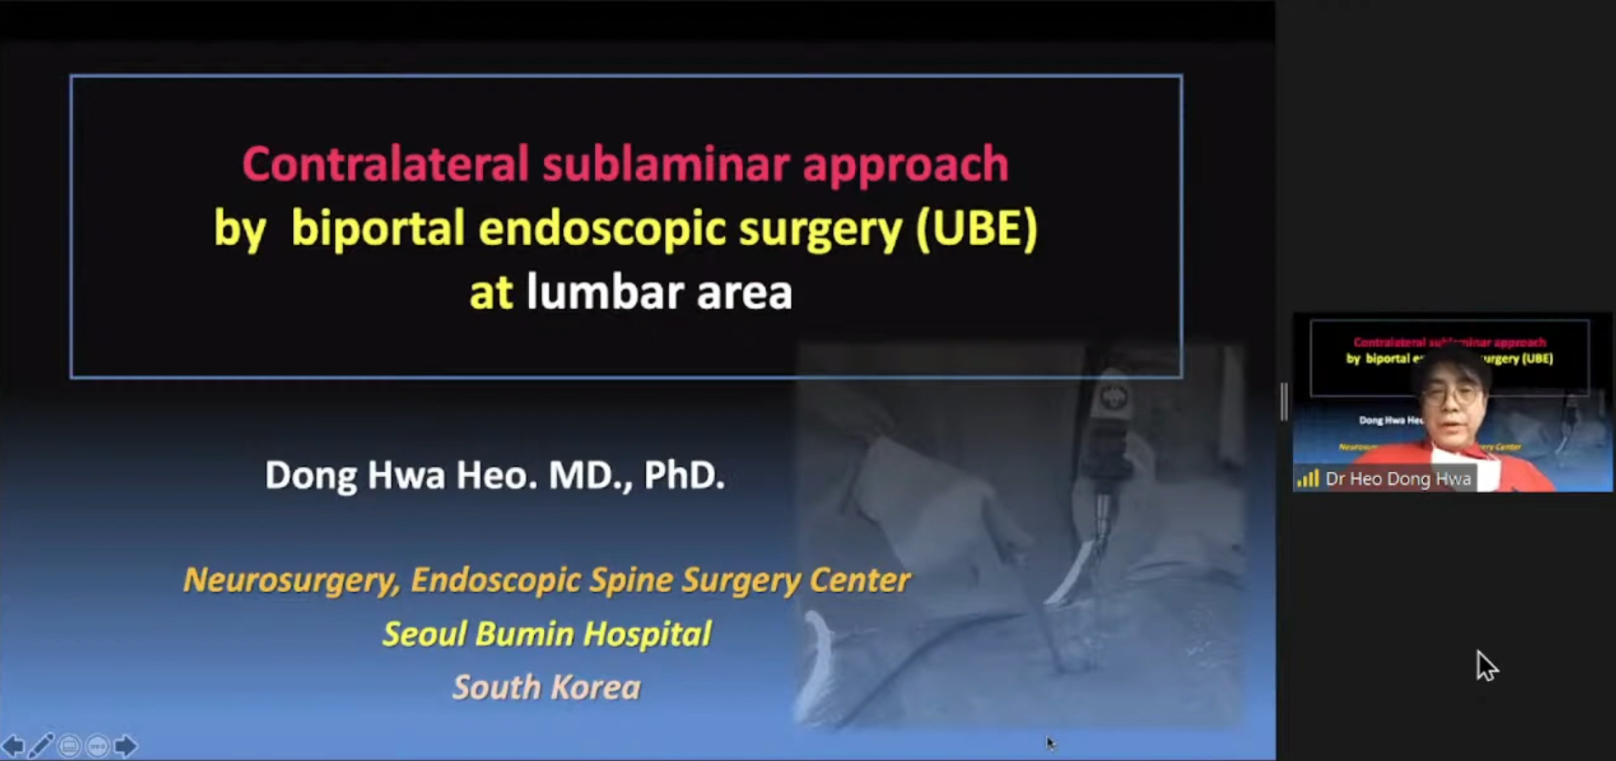 Contralateral Sublaminar Approach by Biportal Endoscopic Surgery (UBE) at Lumbar - Dr Dong Hwa Heo